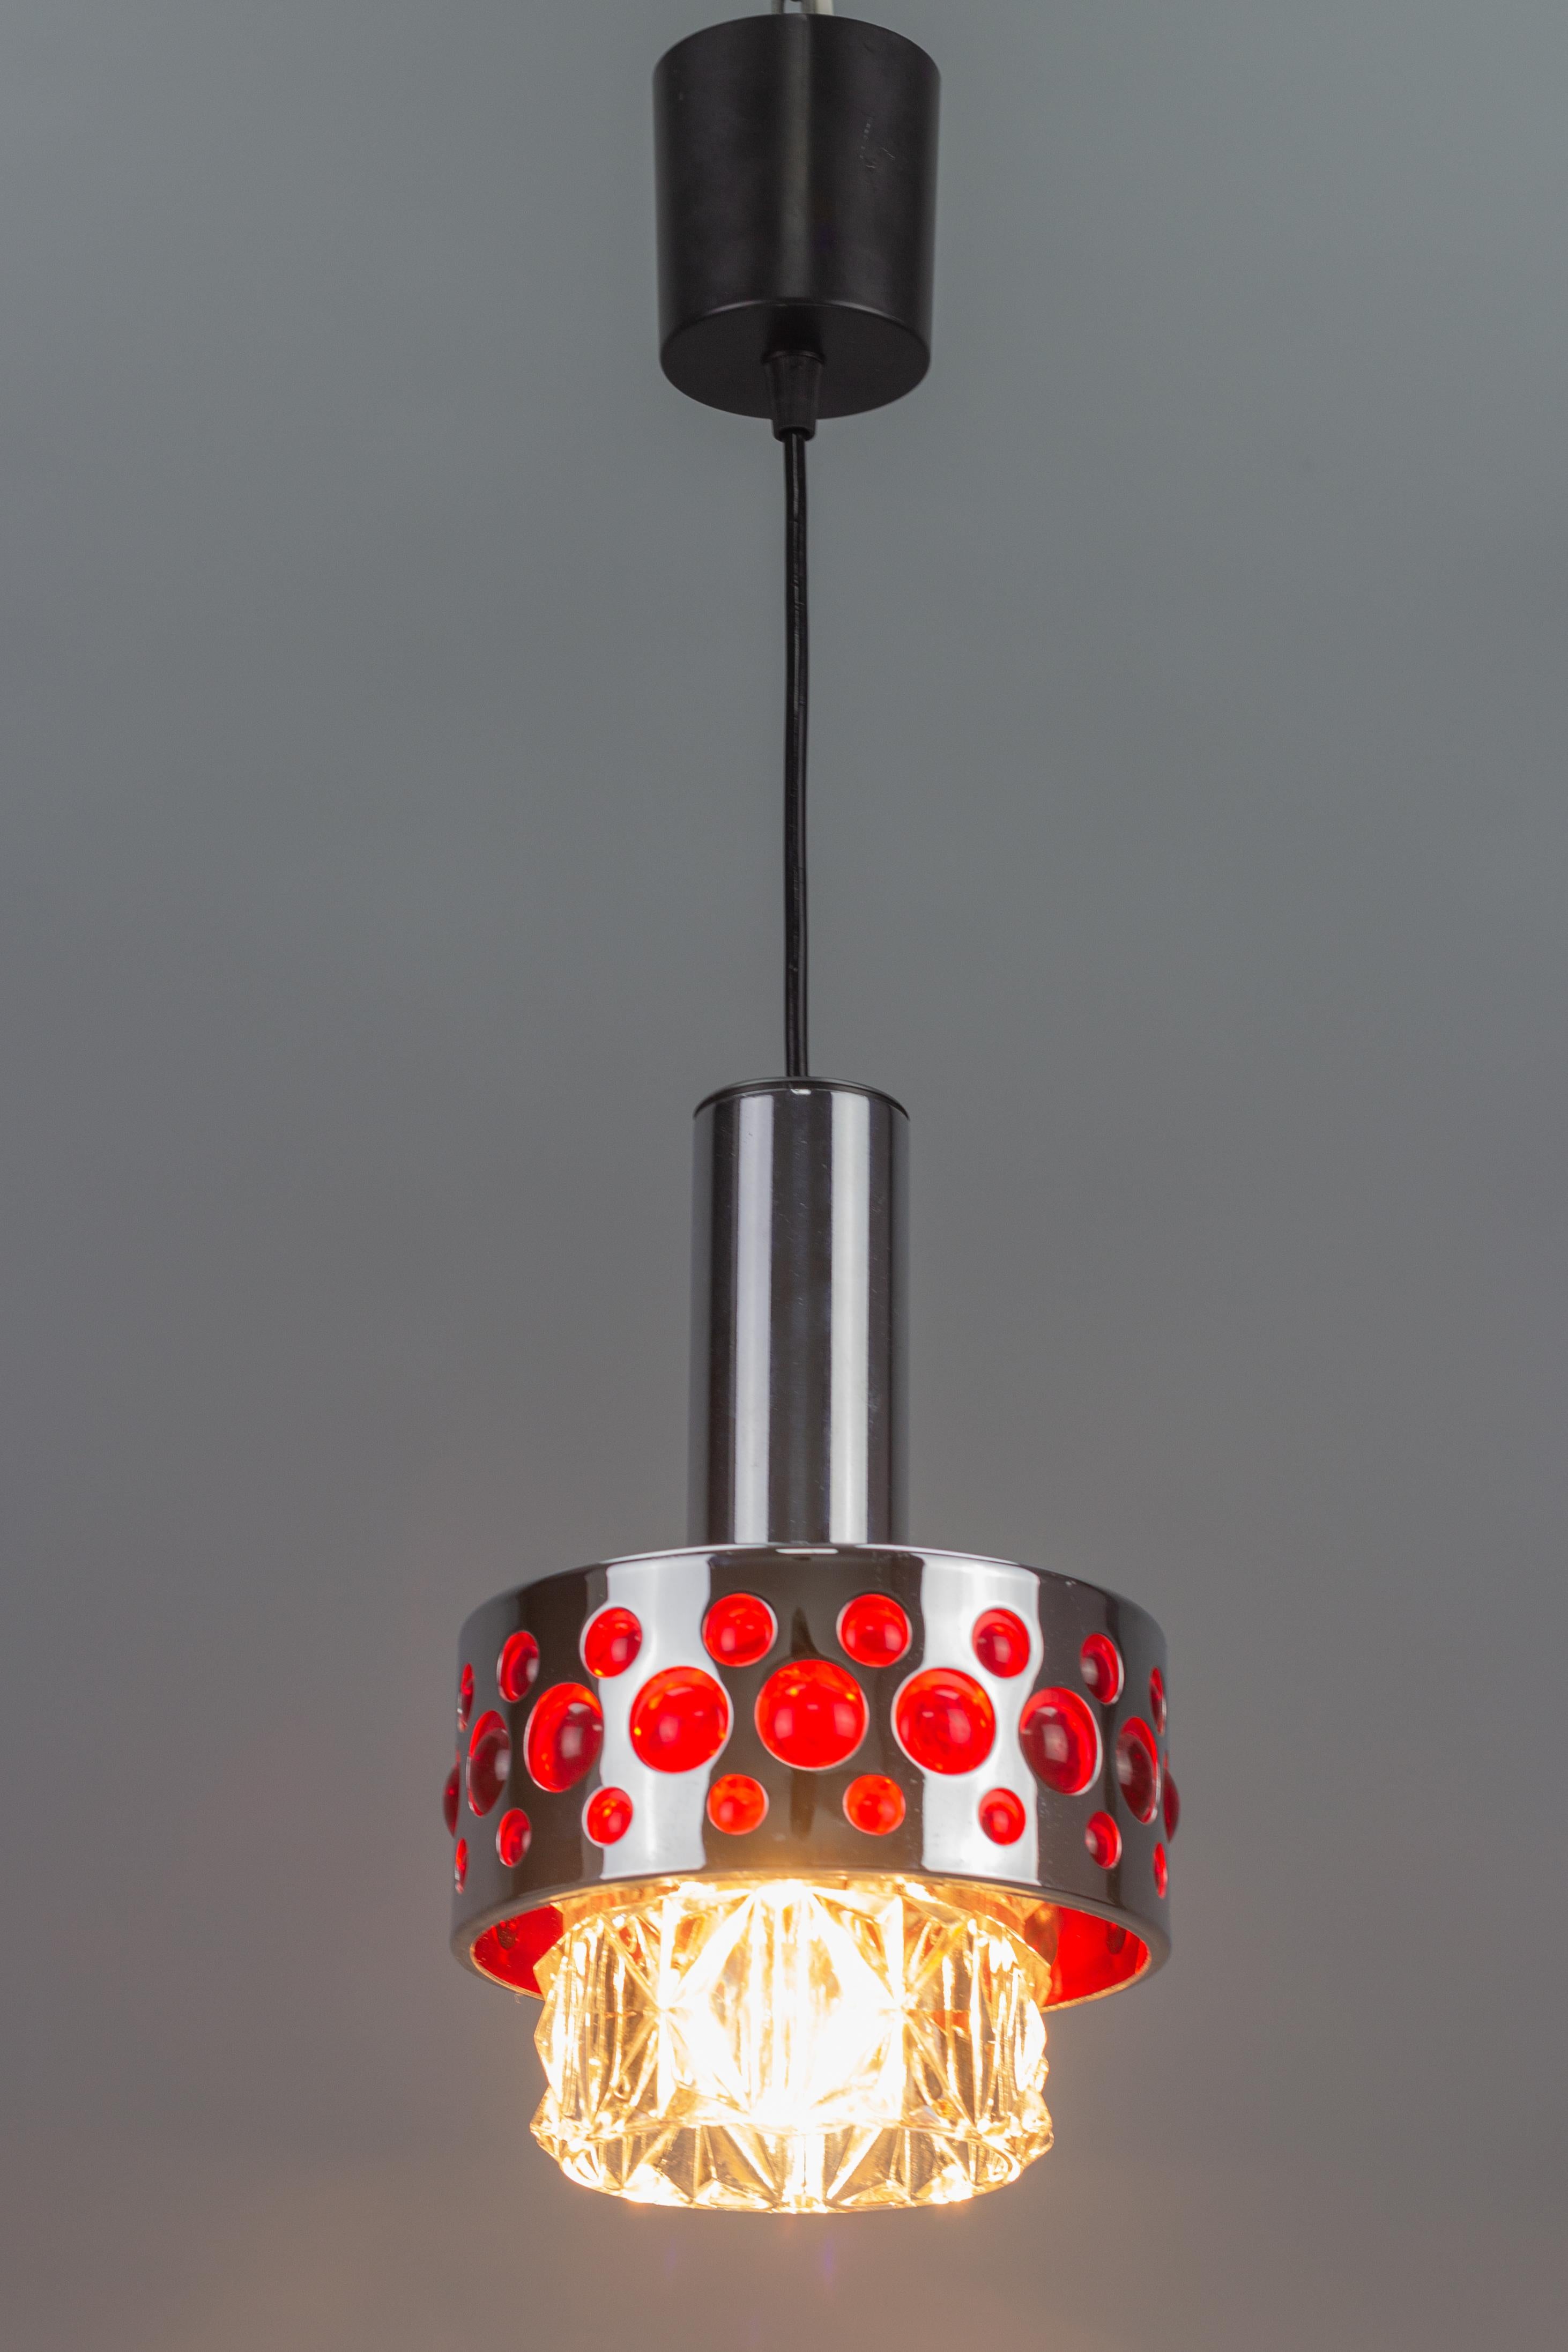 Stylish Mid-Century Modern period pendant light fixture by Richard Essig, Germany, 1970s. This adorable pendant lamp is made of chrome, clear glass, and red plastic.
One socket for E27 (E26) light bulb.
Dimensions: height: 49 cm / 19.29 in;